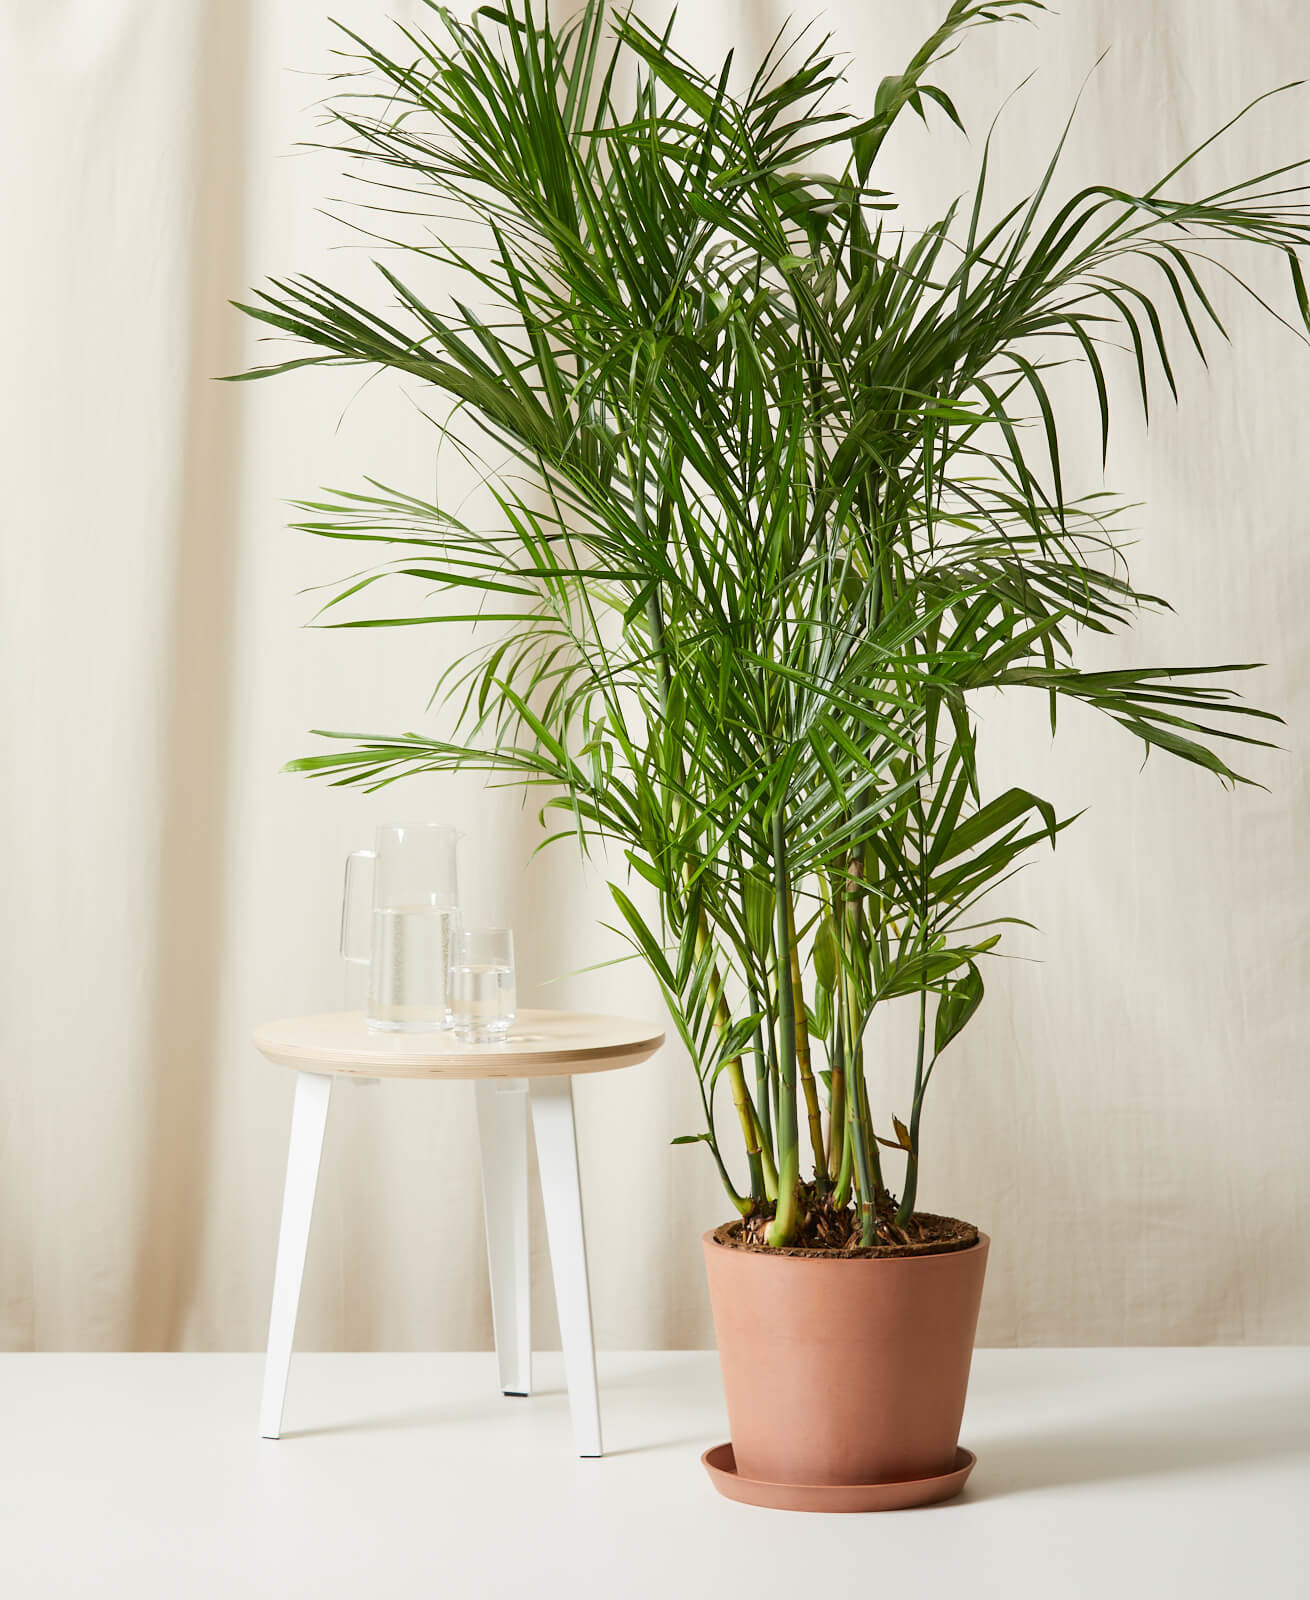 the large bamboo plant in a clay-colored planter in a room